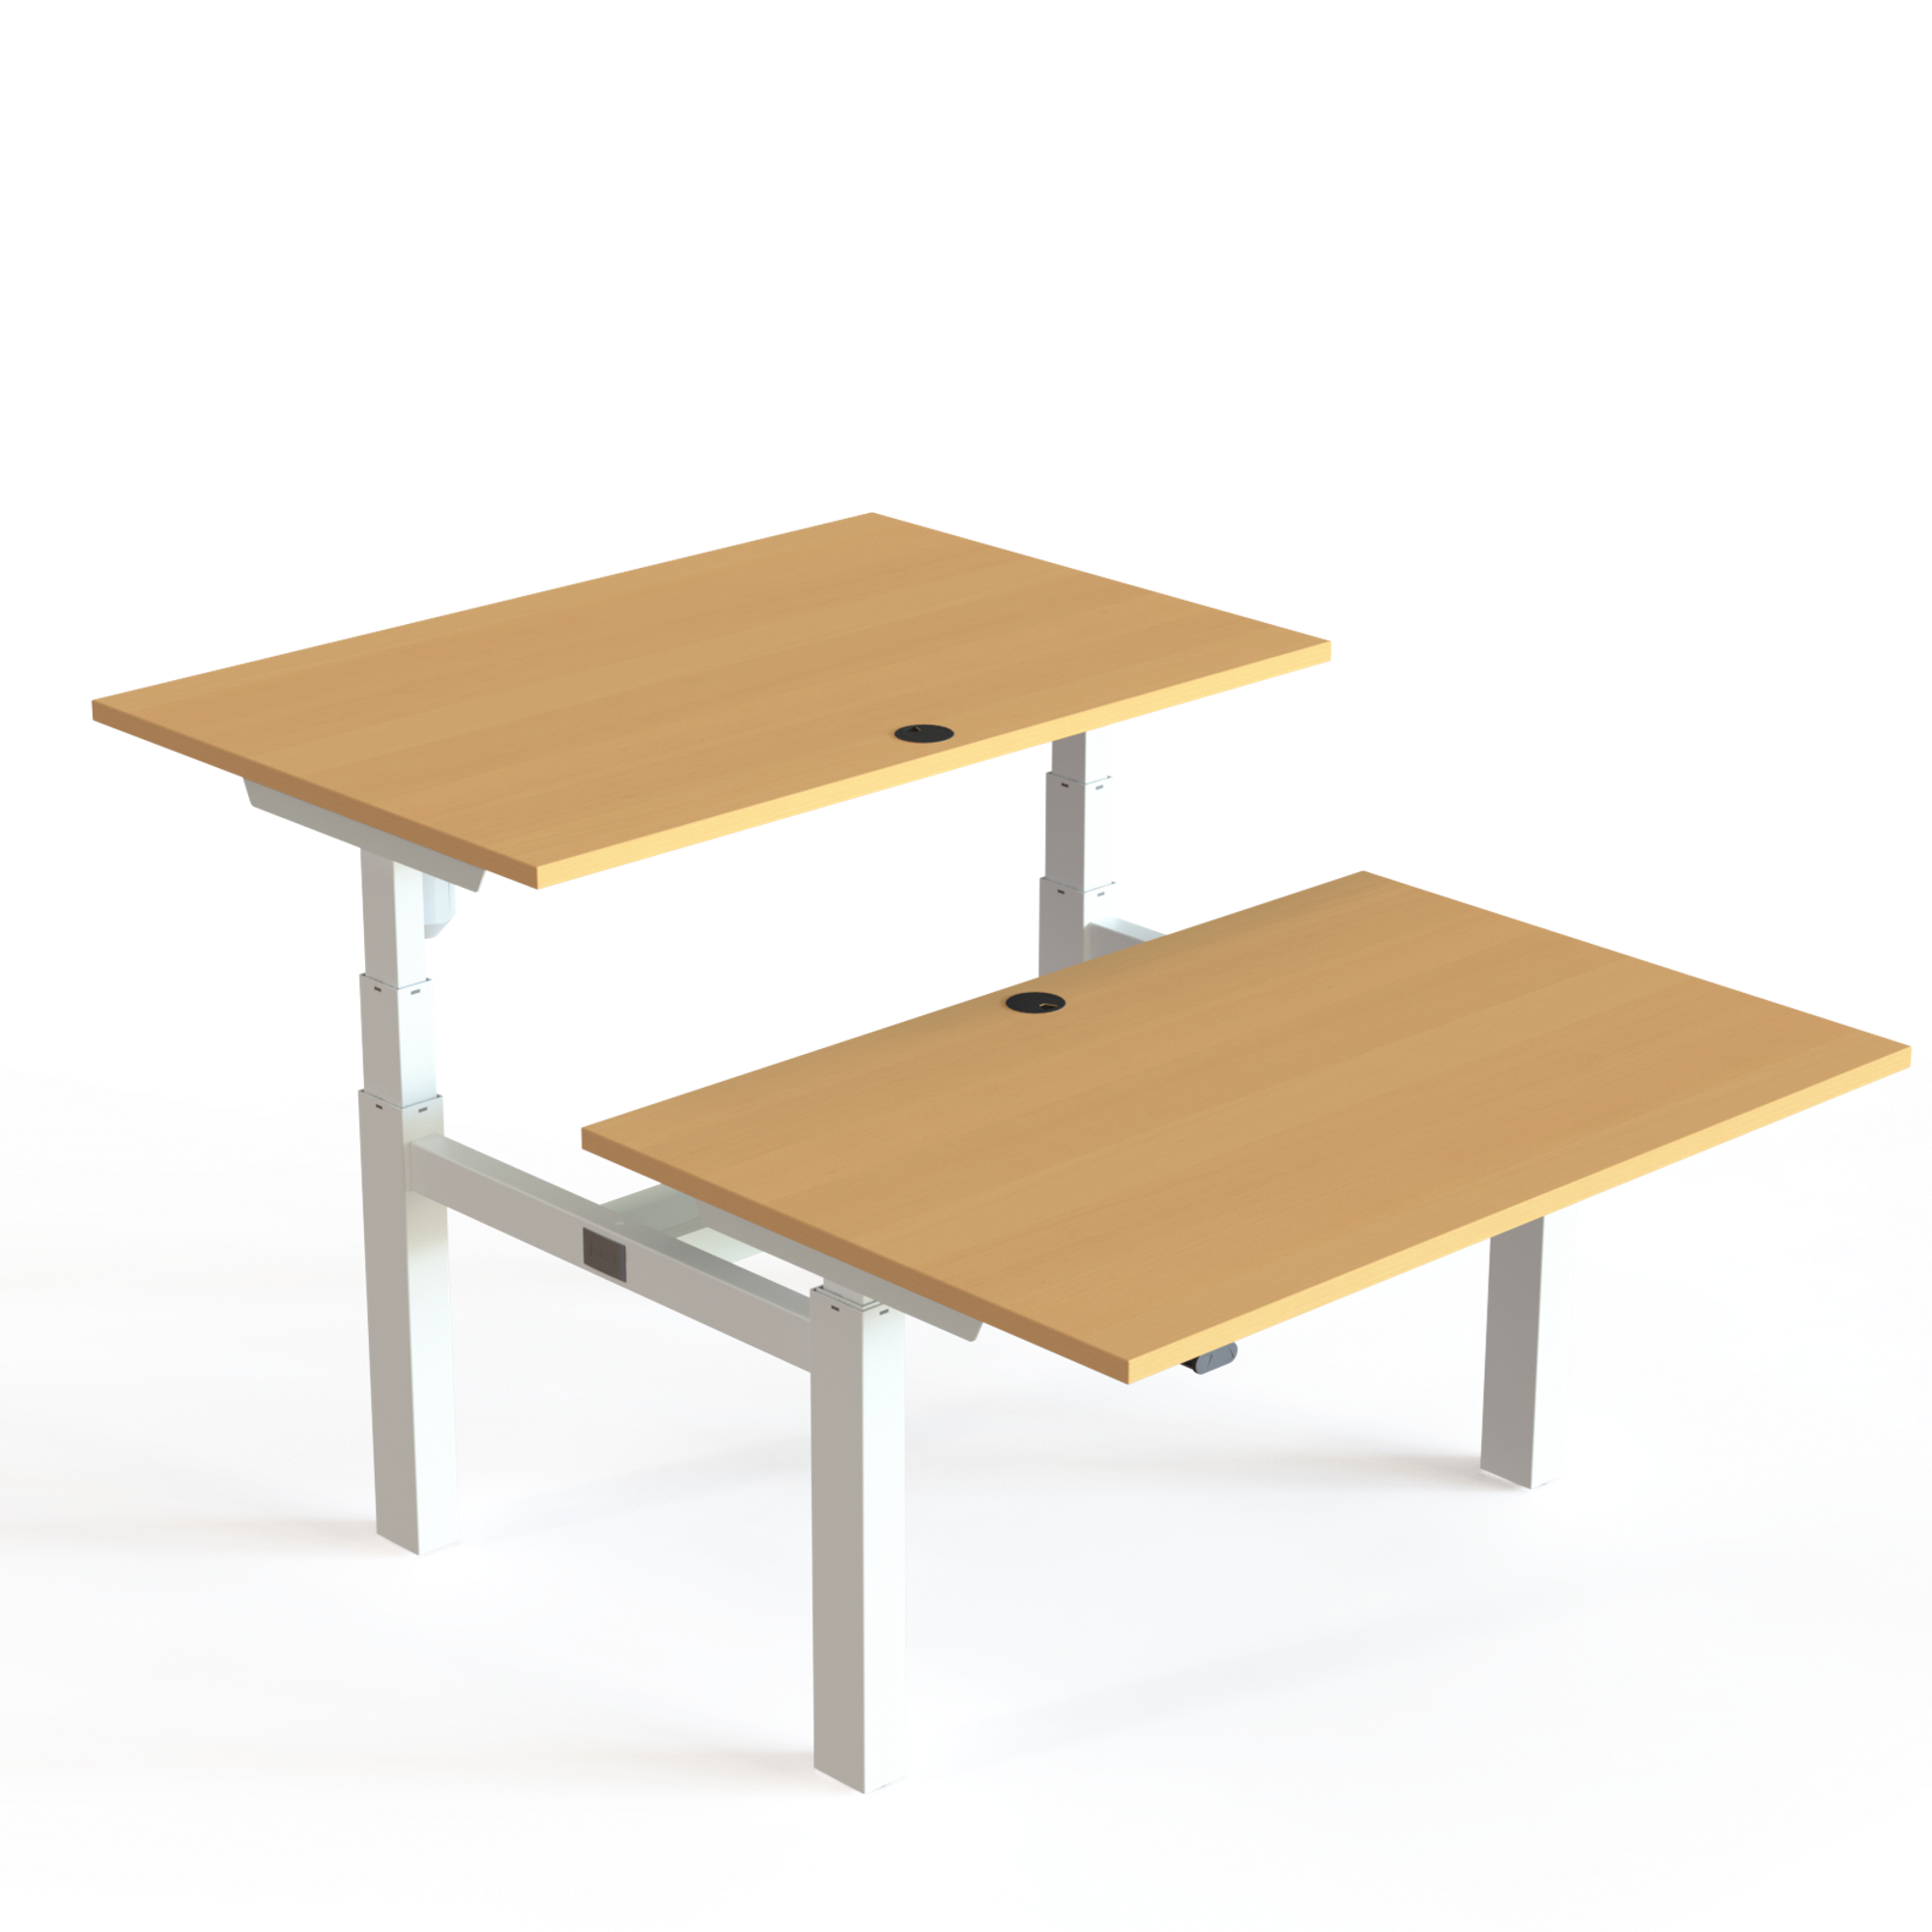 Electric Adjustable Desk | 120x80 cm | Beech with white frame